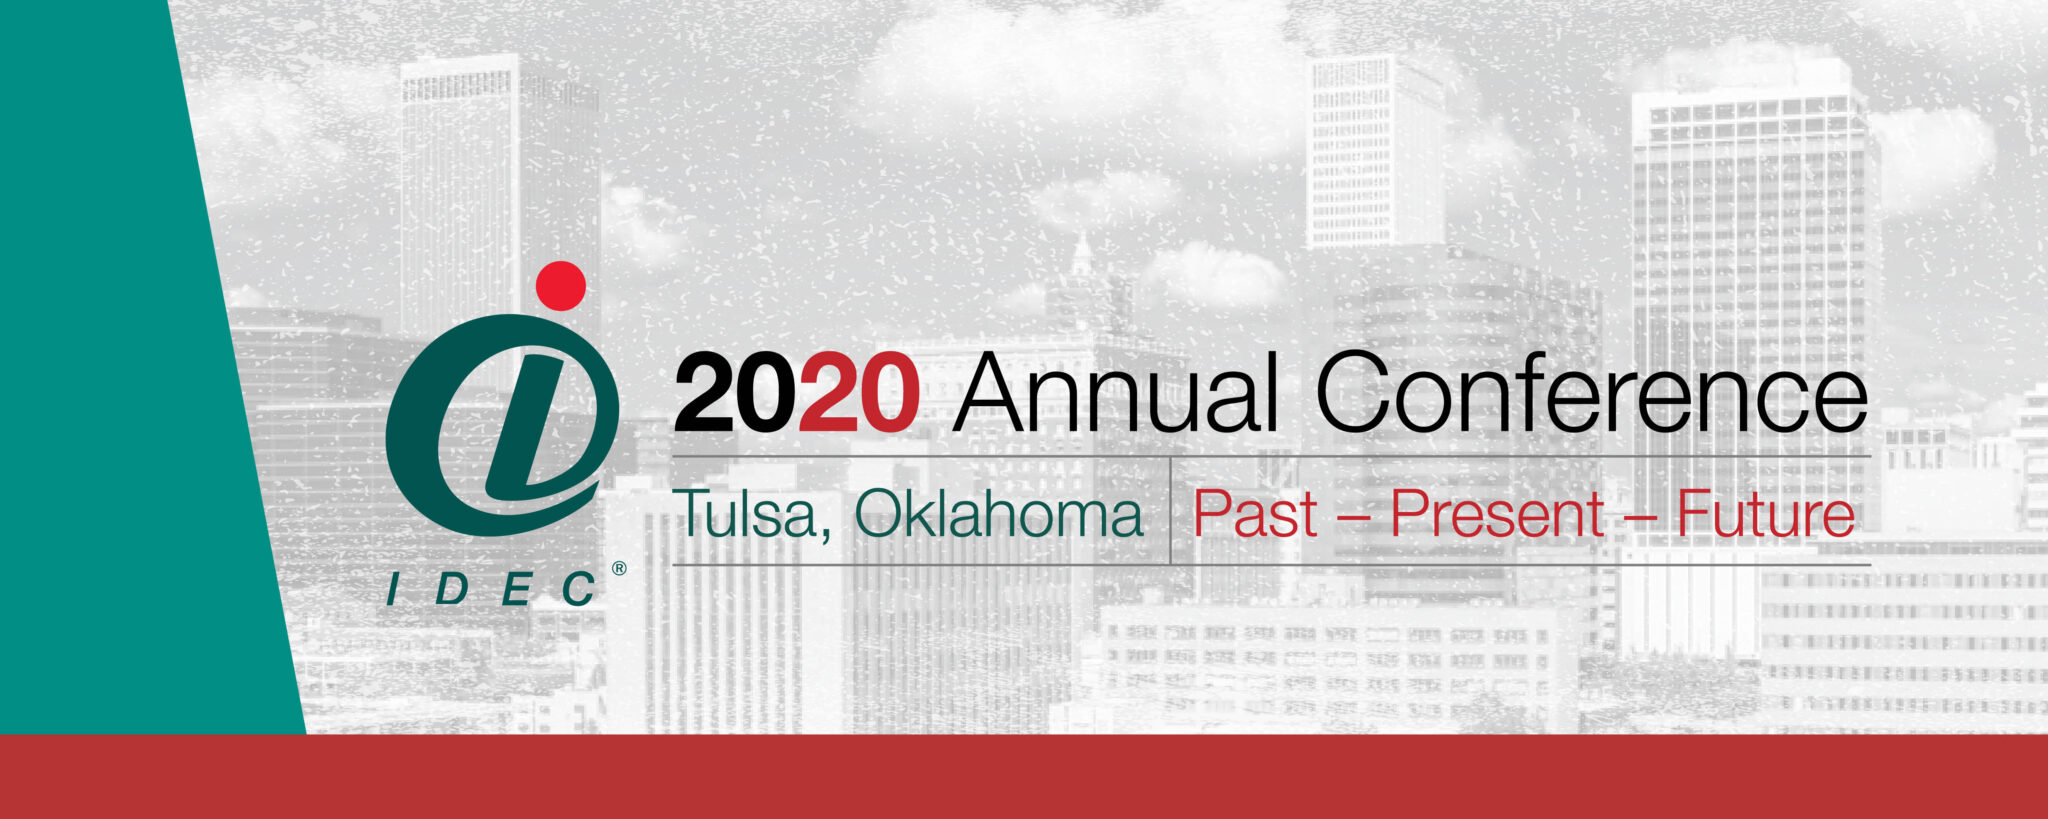 IDEC 2020 annual conference event banner